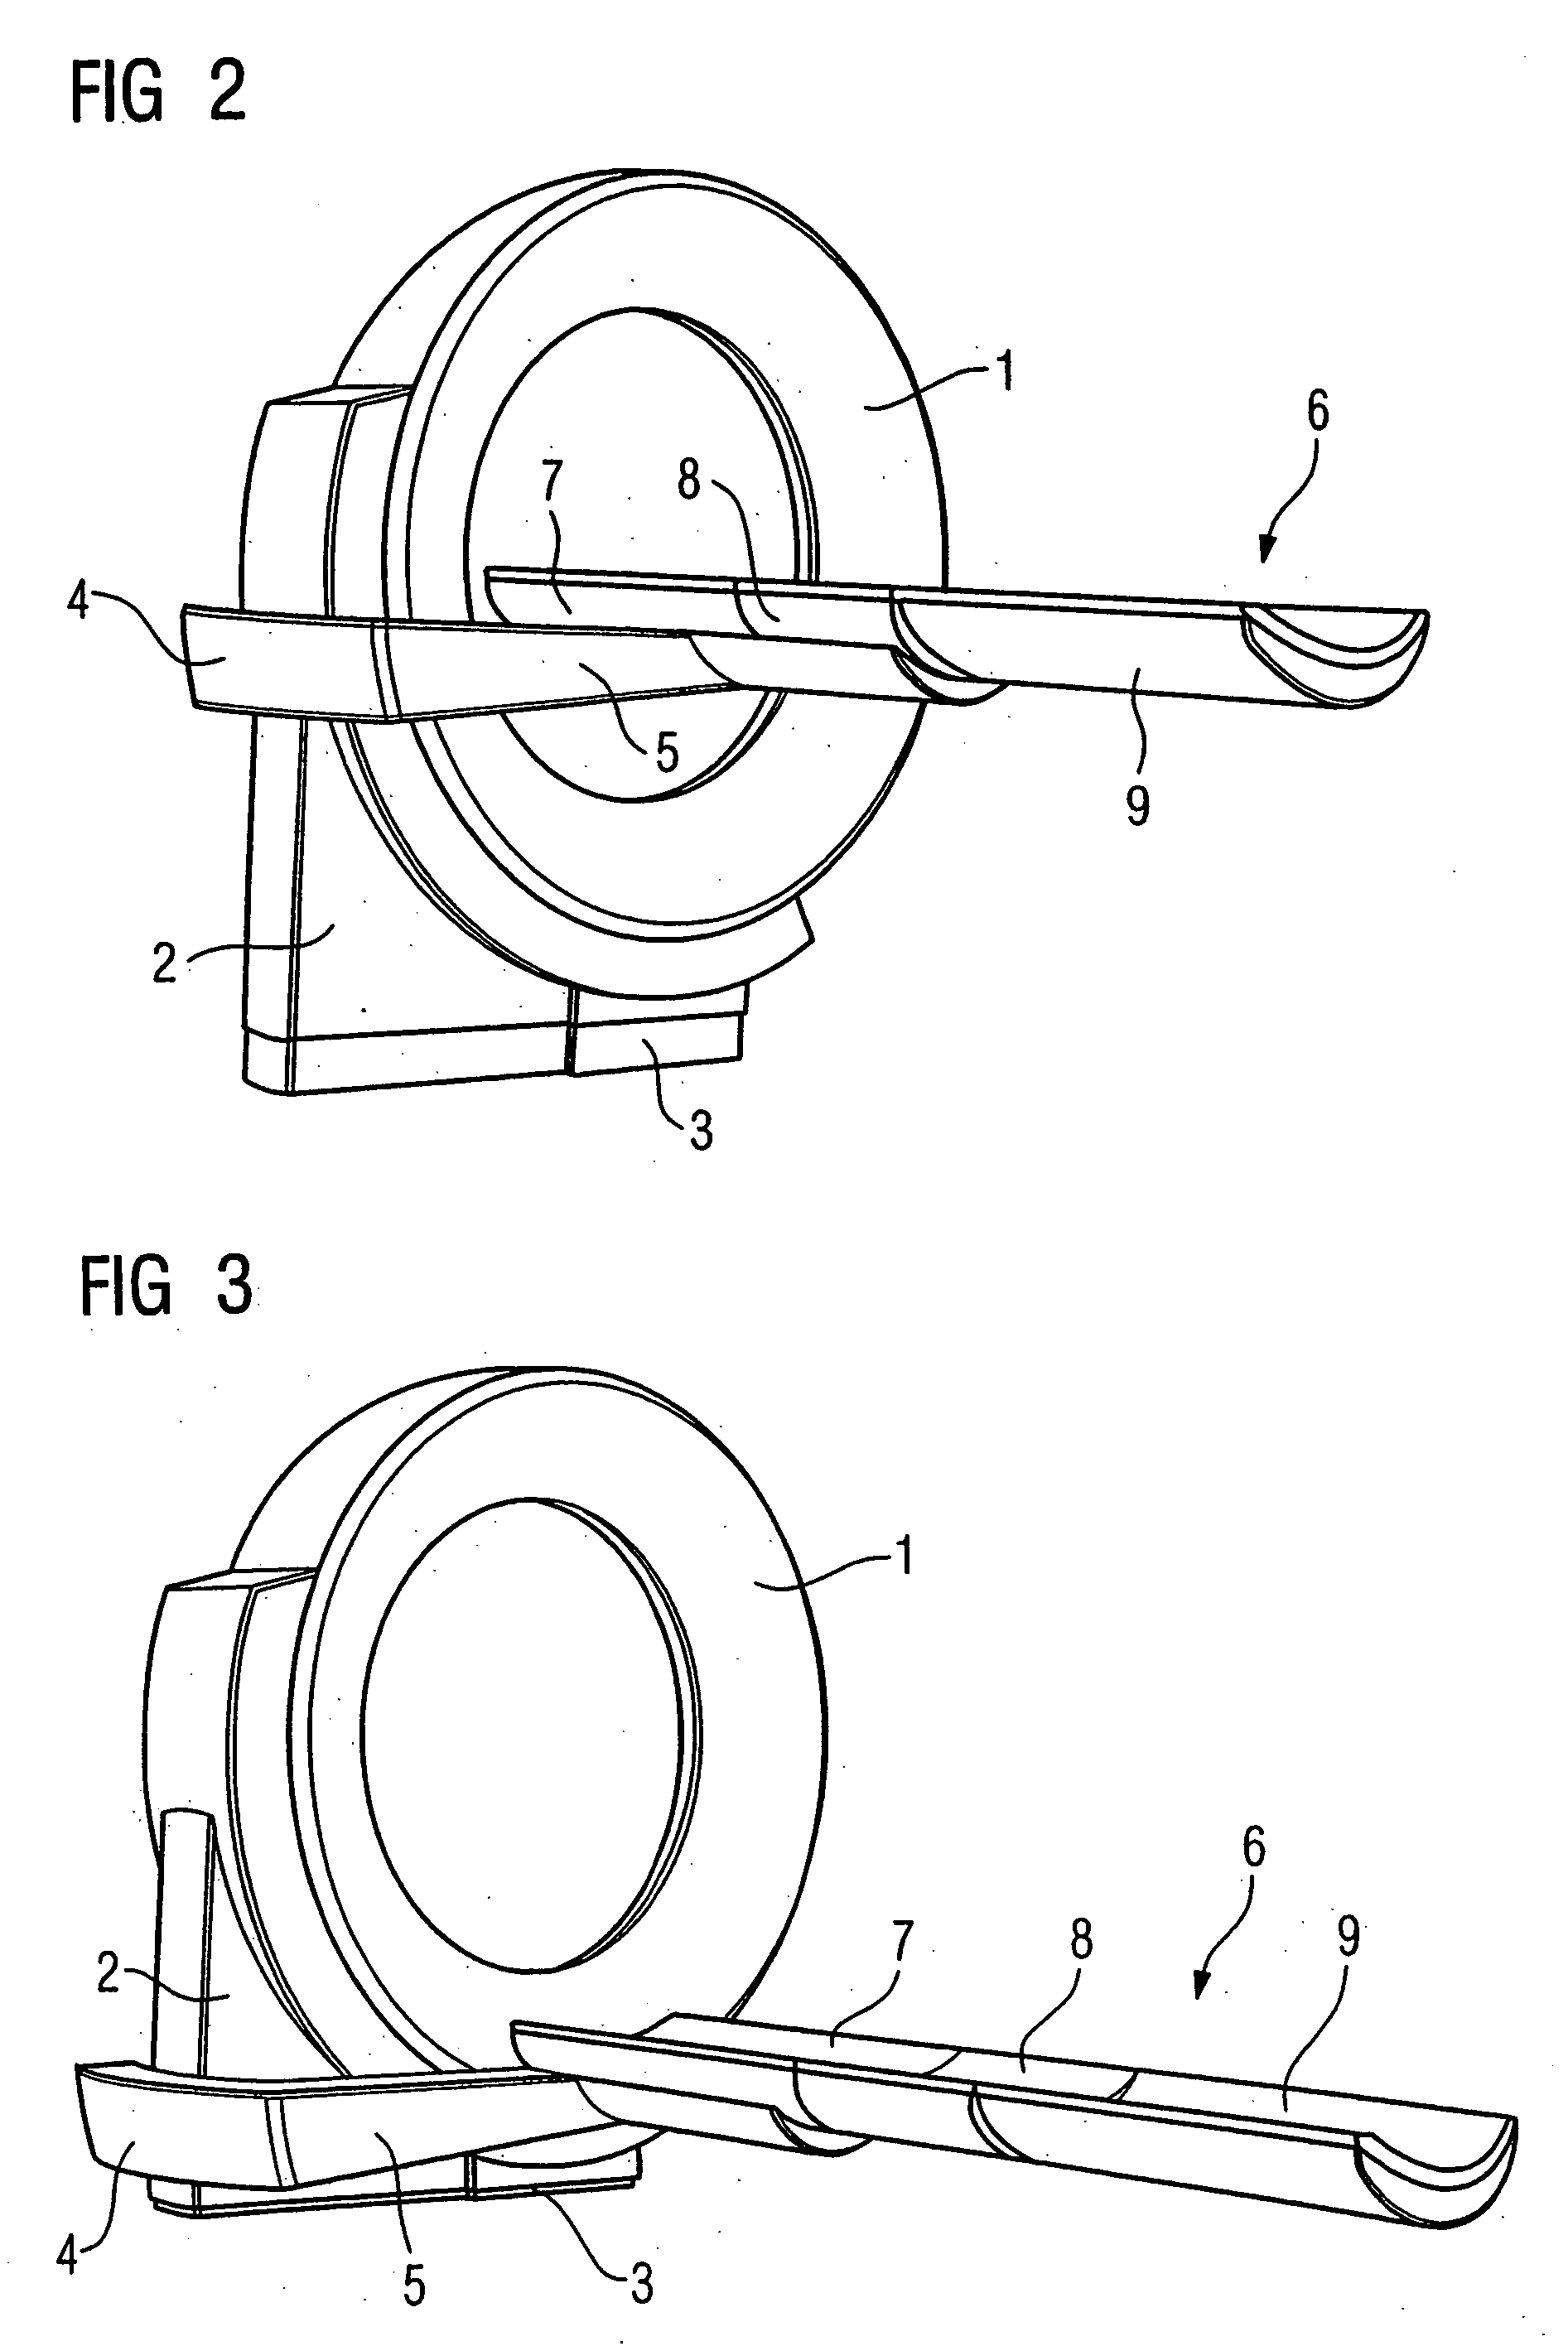 Imaging tomography apparatus having an attached patient support with a movable backrest